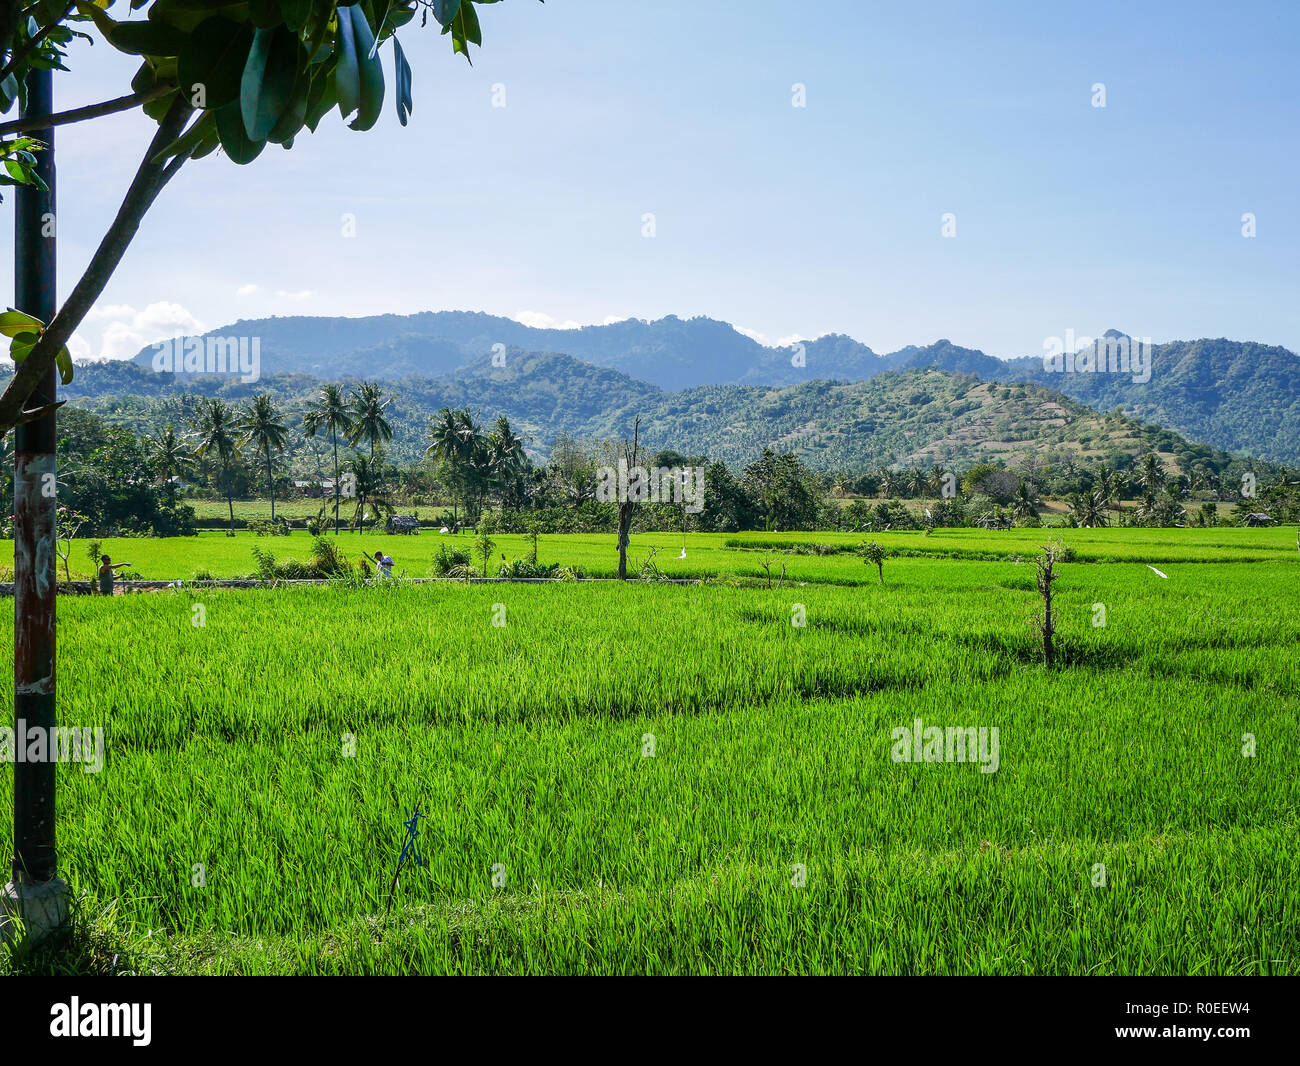 A rice field in Indonesia - Bali. Stock Photo